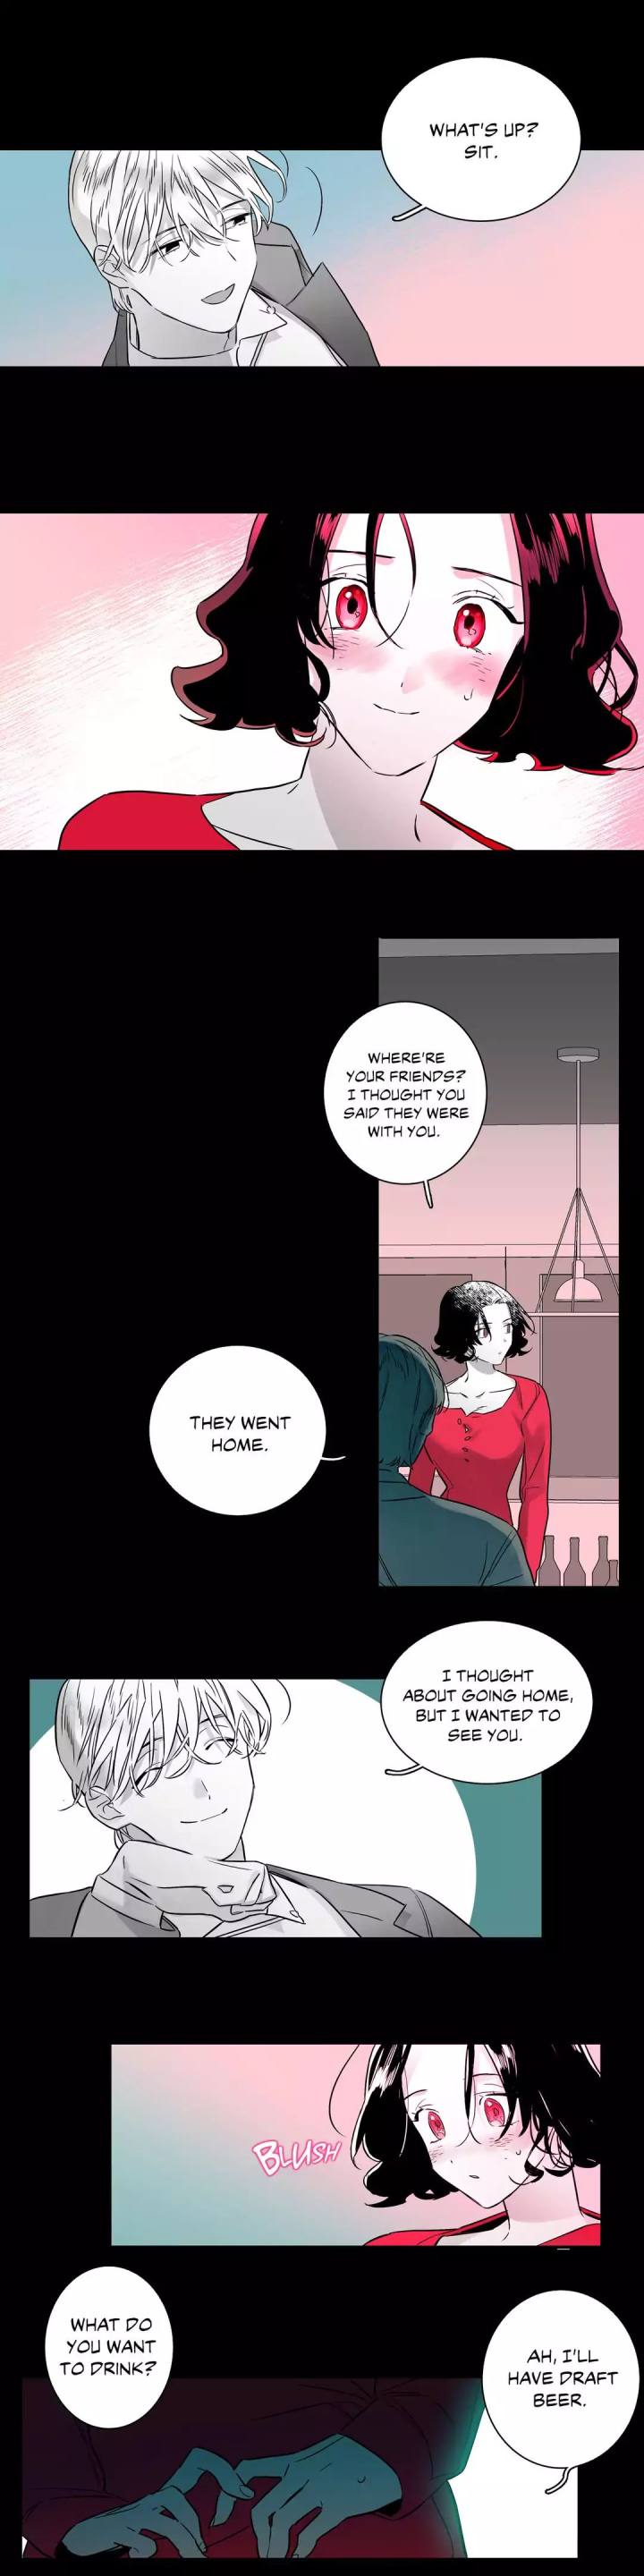 Vanishing Twin - Chapter 8 Page 3